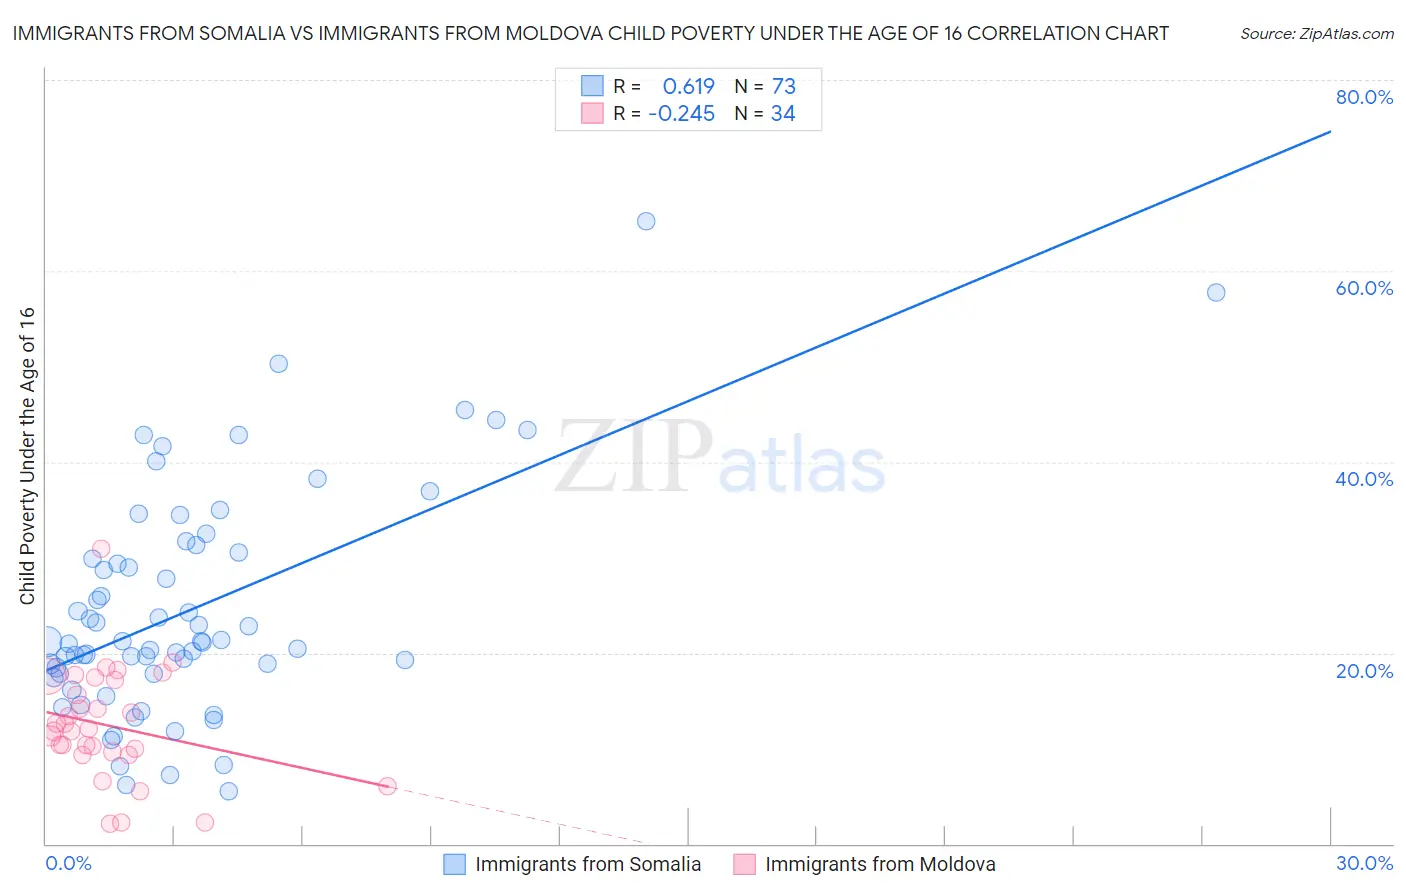 Immigrants from Somalia vs Immigrants from Moldova Child Poverty Under the Age of 16